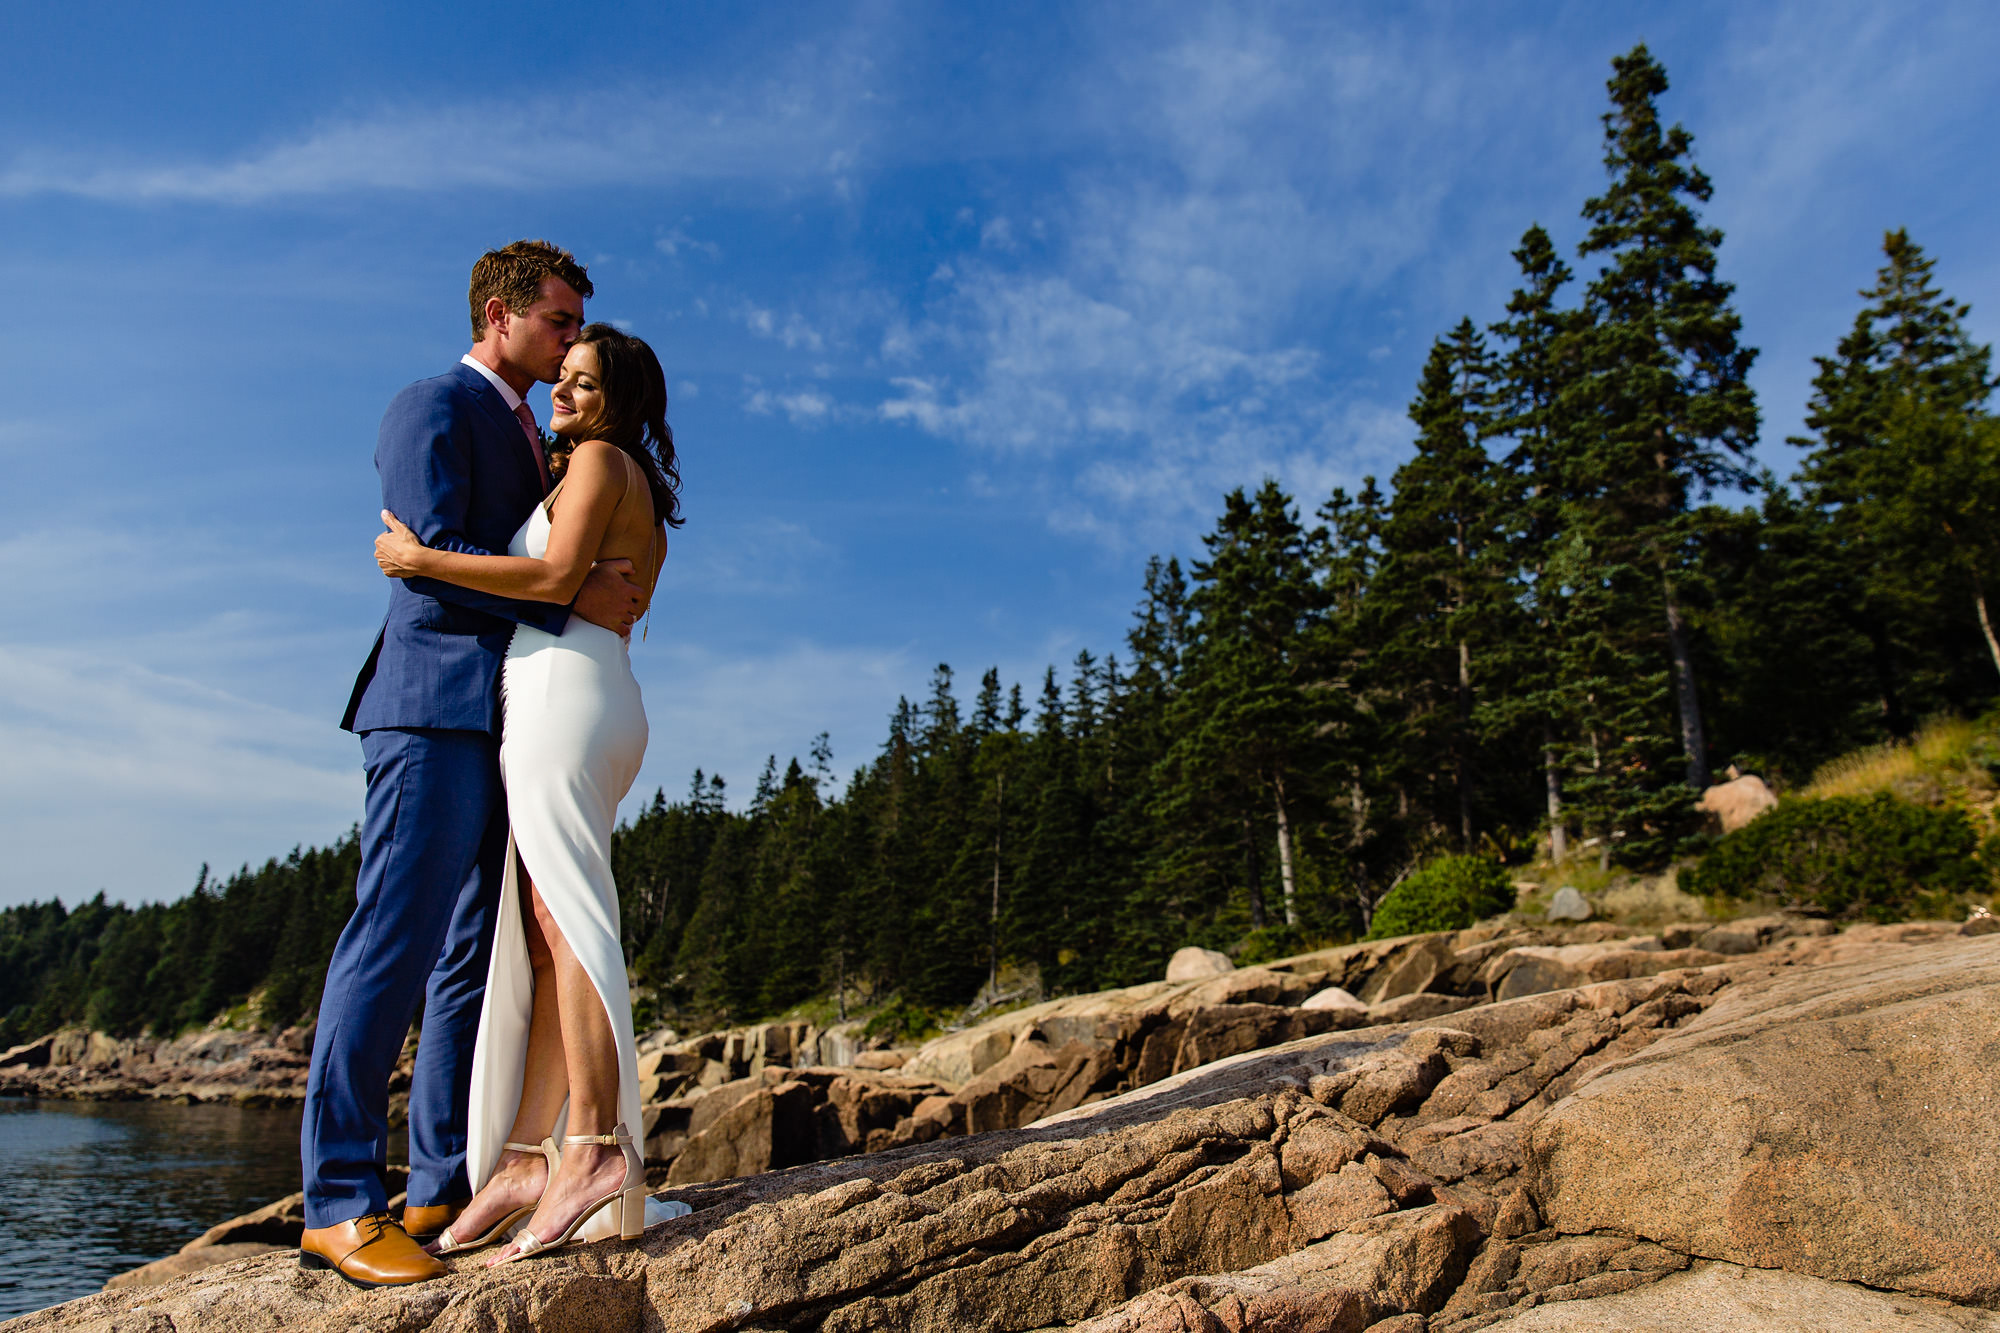 A portrait of a bride and groom at Otter Point in Acadia National Park